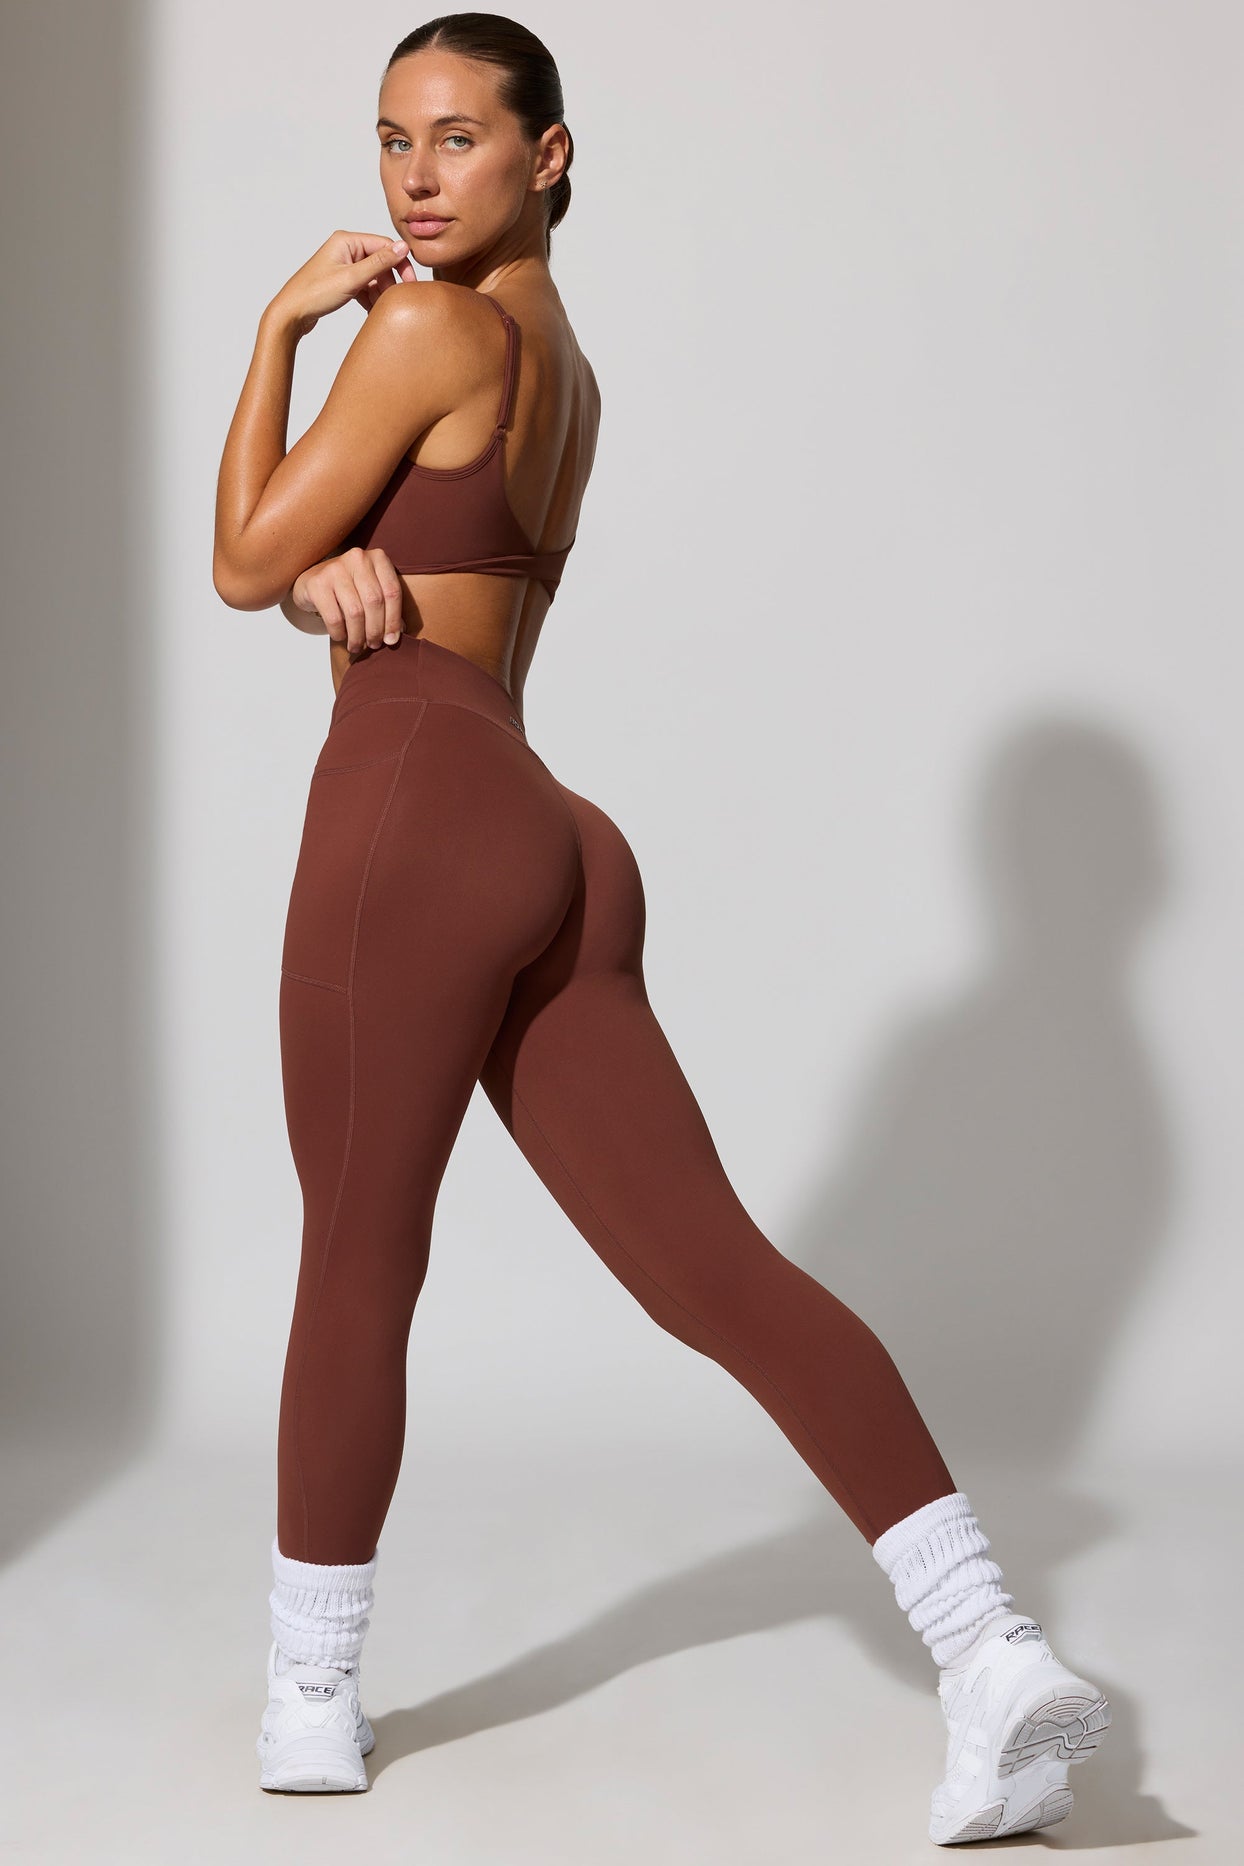 Change Full Length Leggings with Pockets in Chocolate